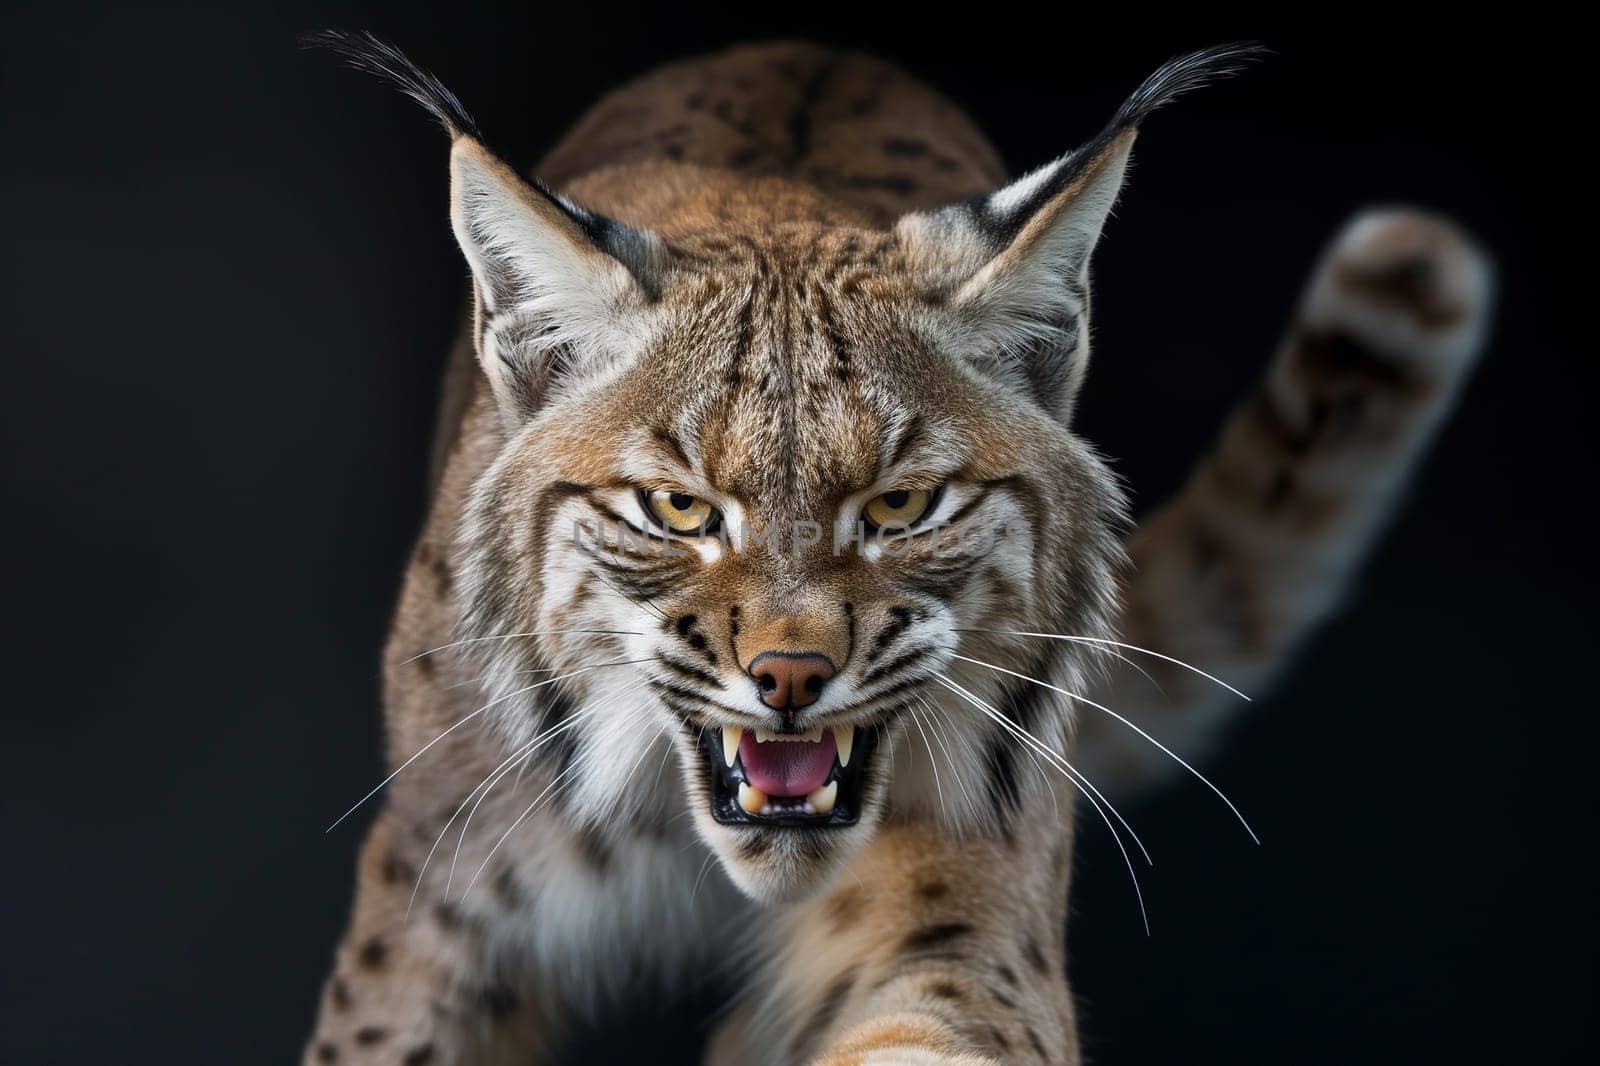 A wild and angry eurasian lynx on a black background